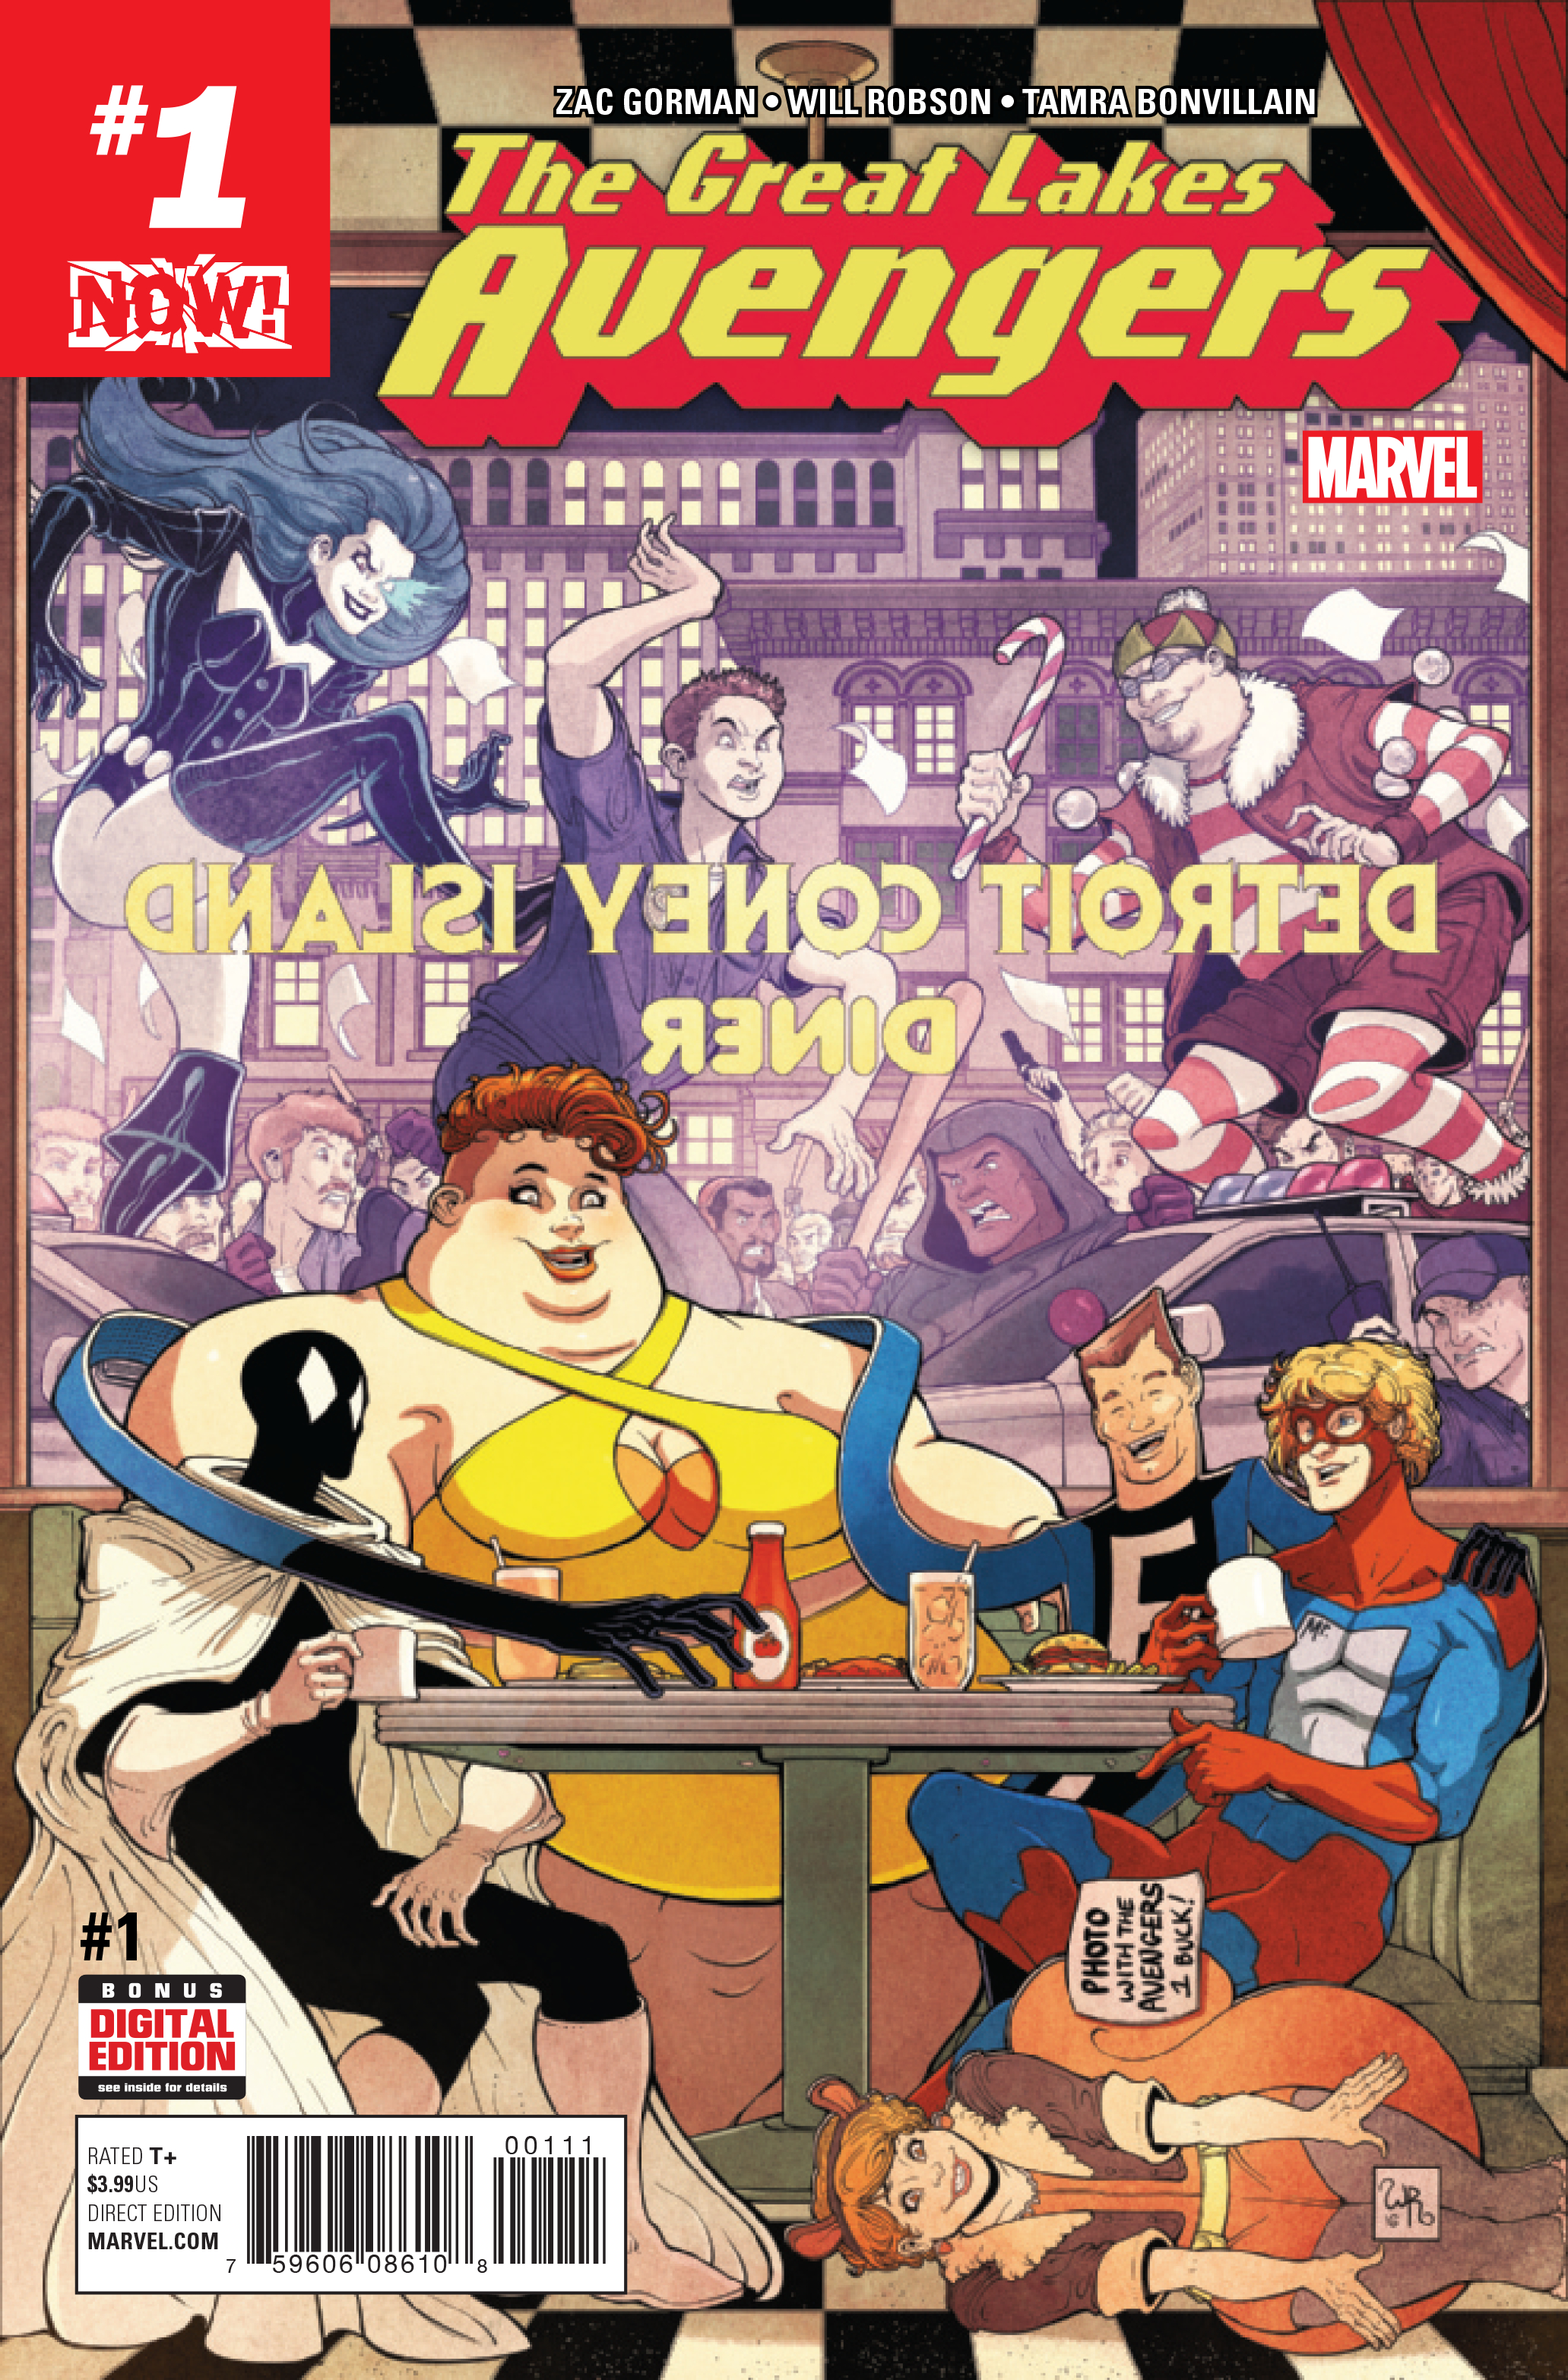 GREAT LAKES AVENGERS #1 NOW